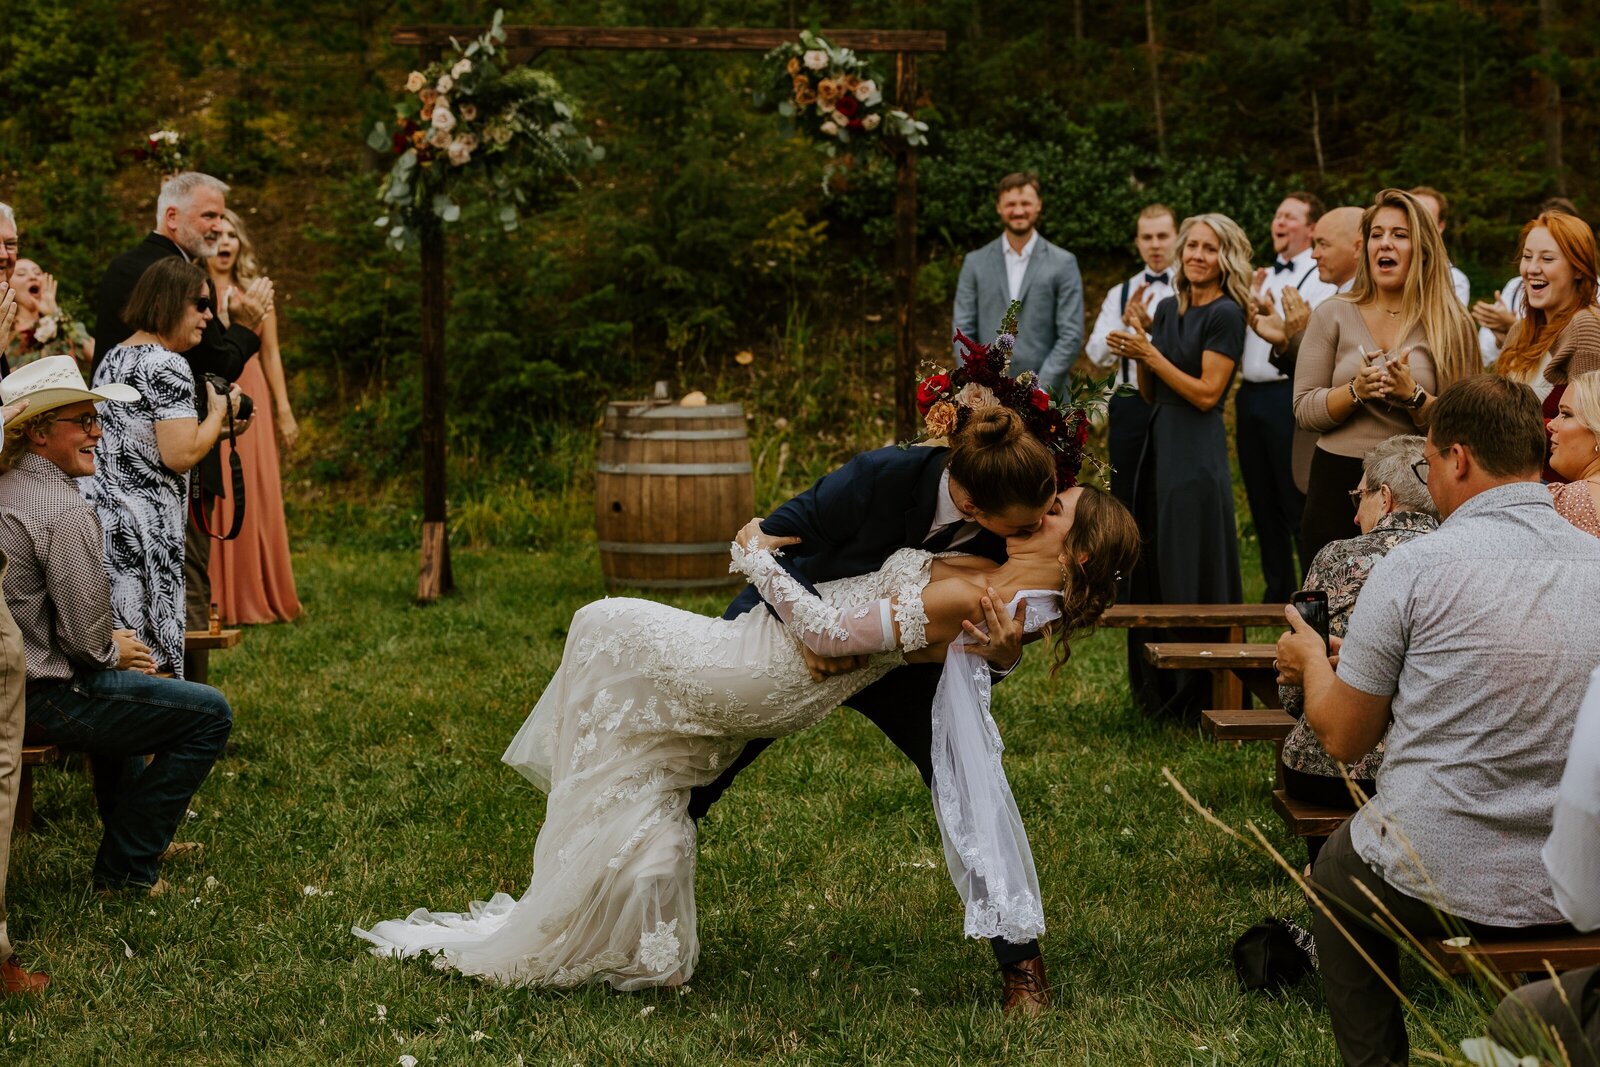 Groom kisses the bride during their wedding at the commons.